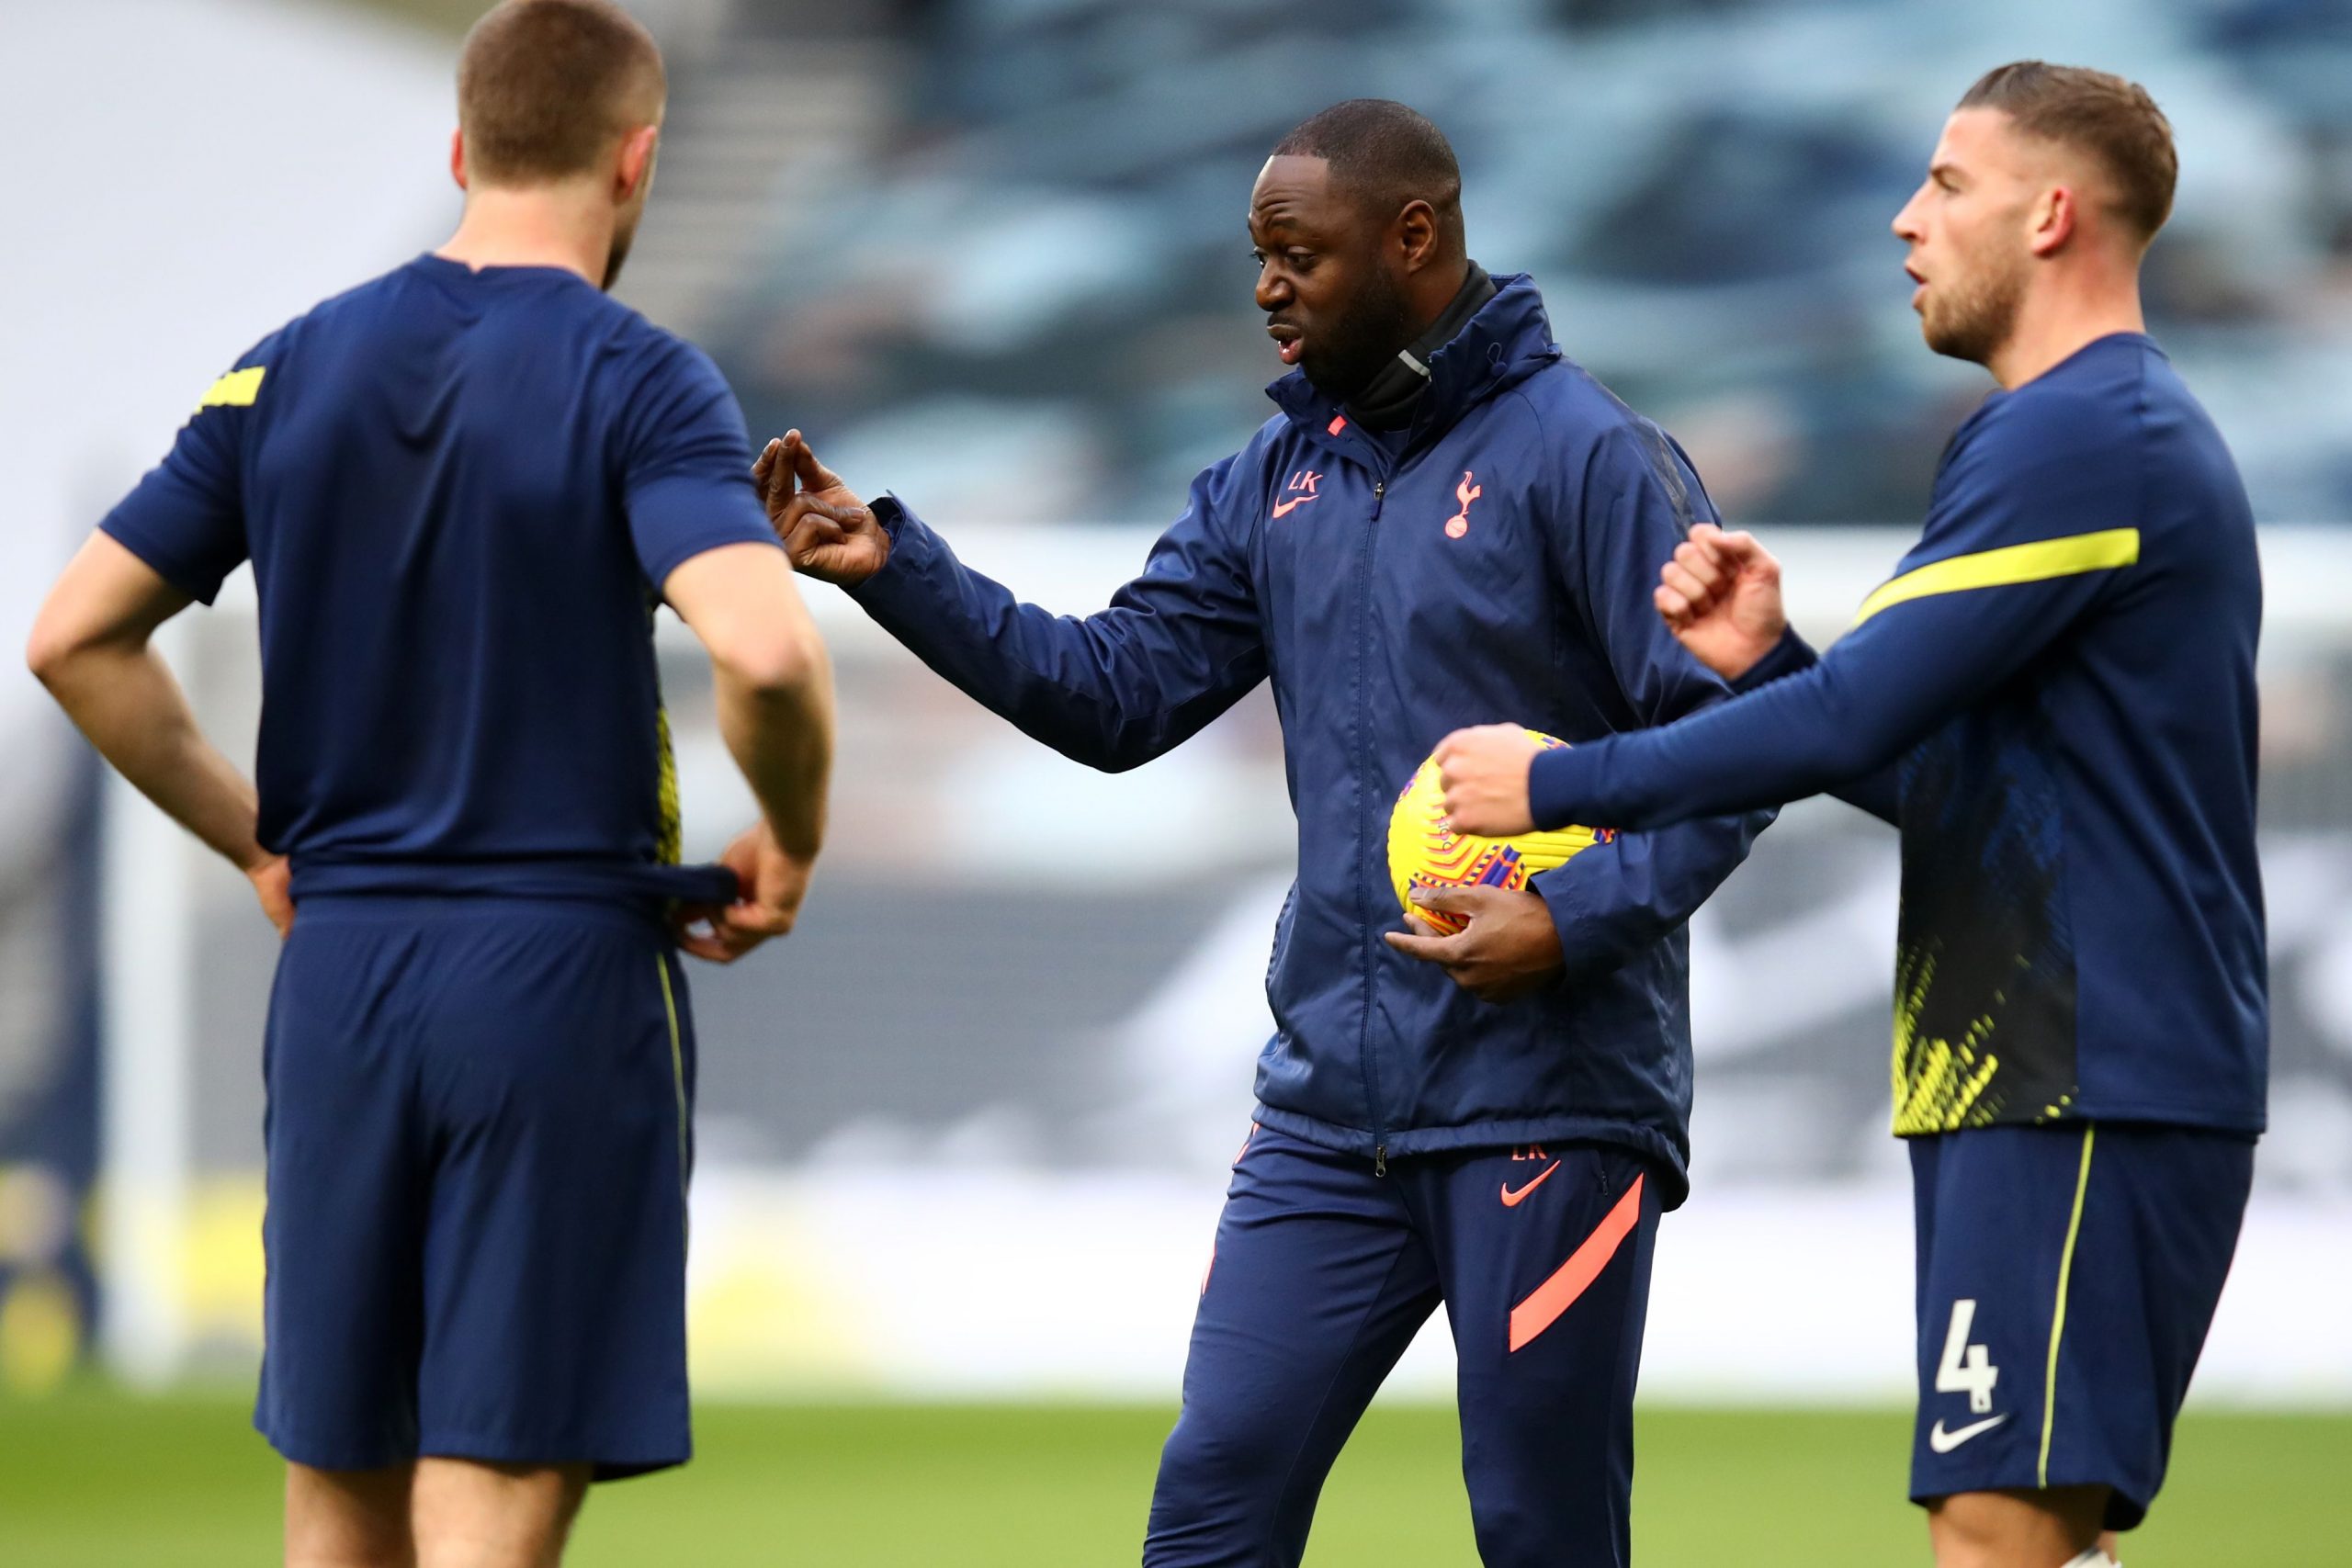 Ledley King with Eric Dier and Jan Vertonghen when the three of them were together at Tottenham Hotspur.